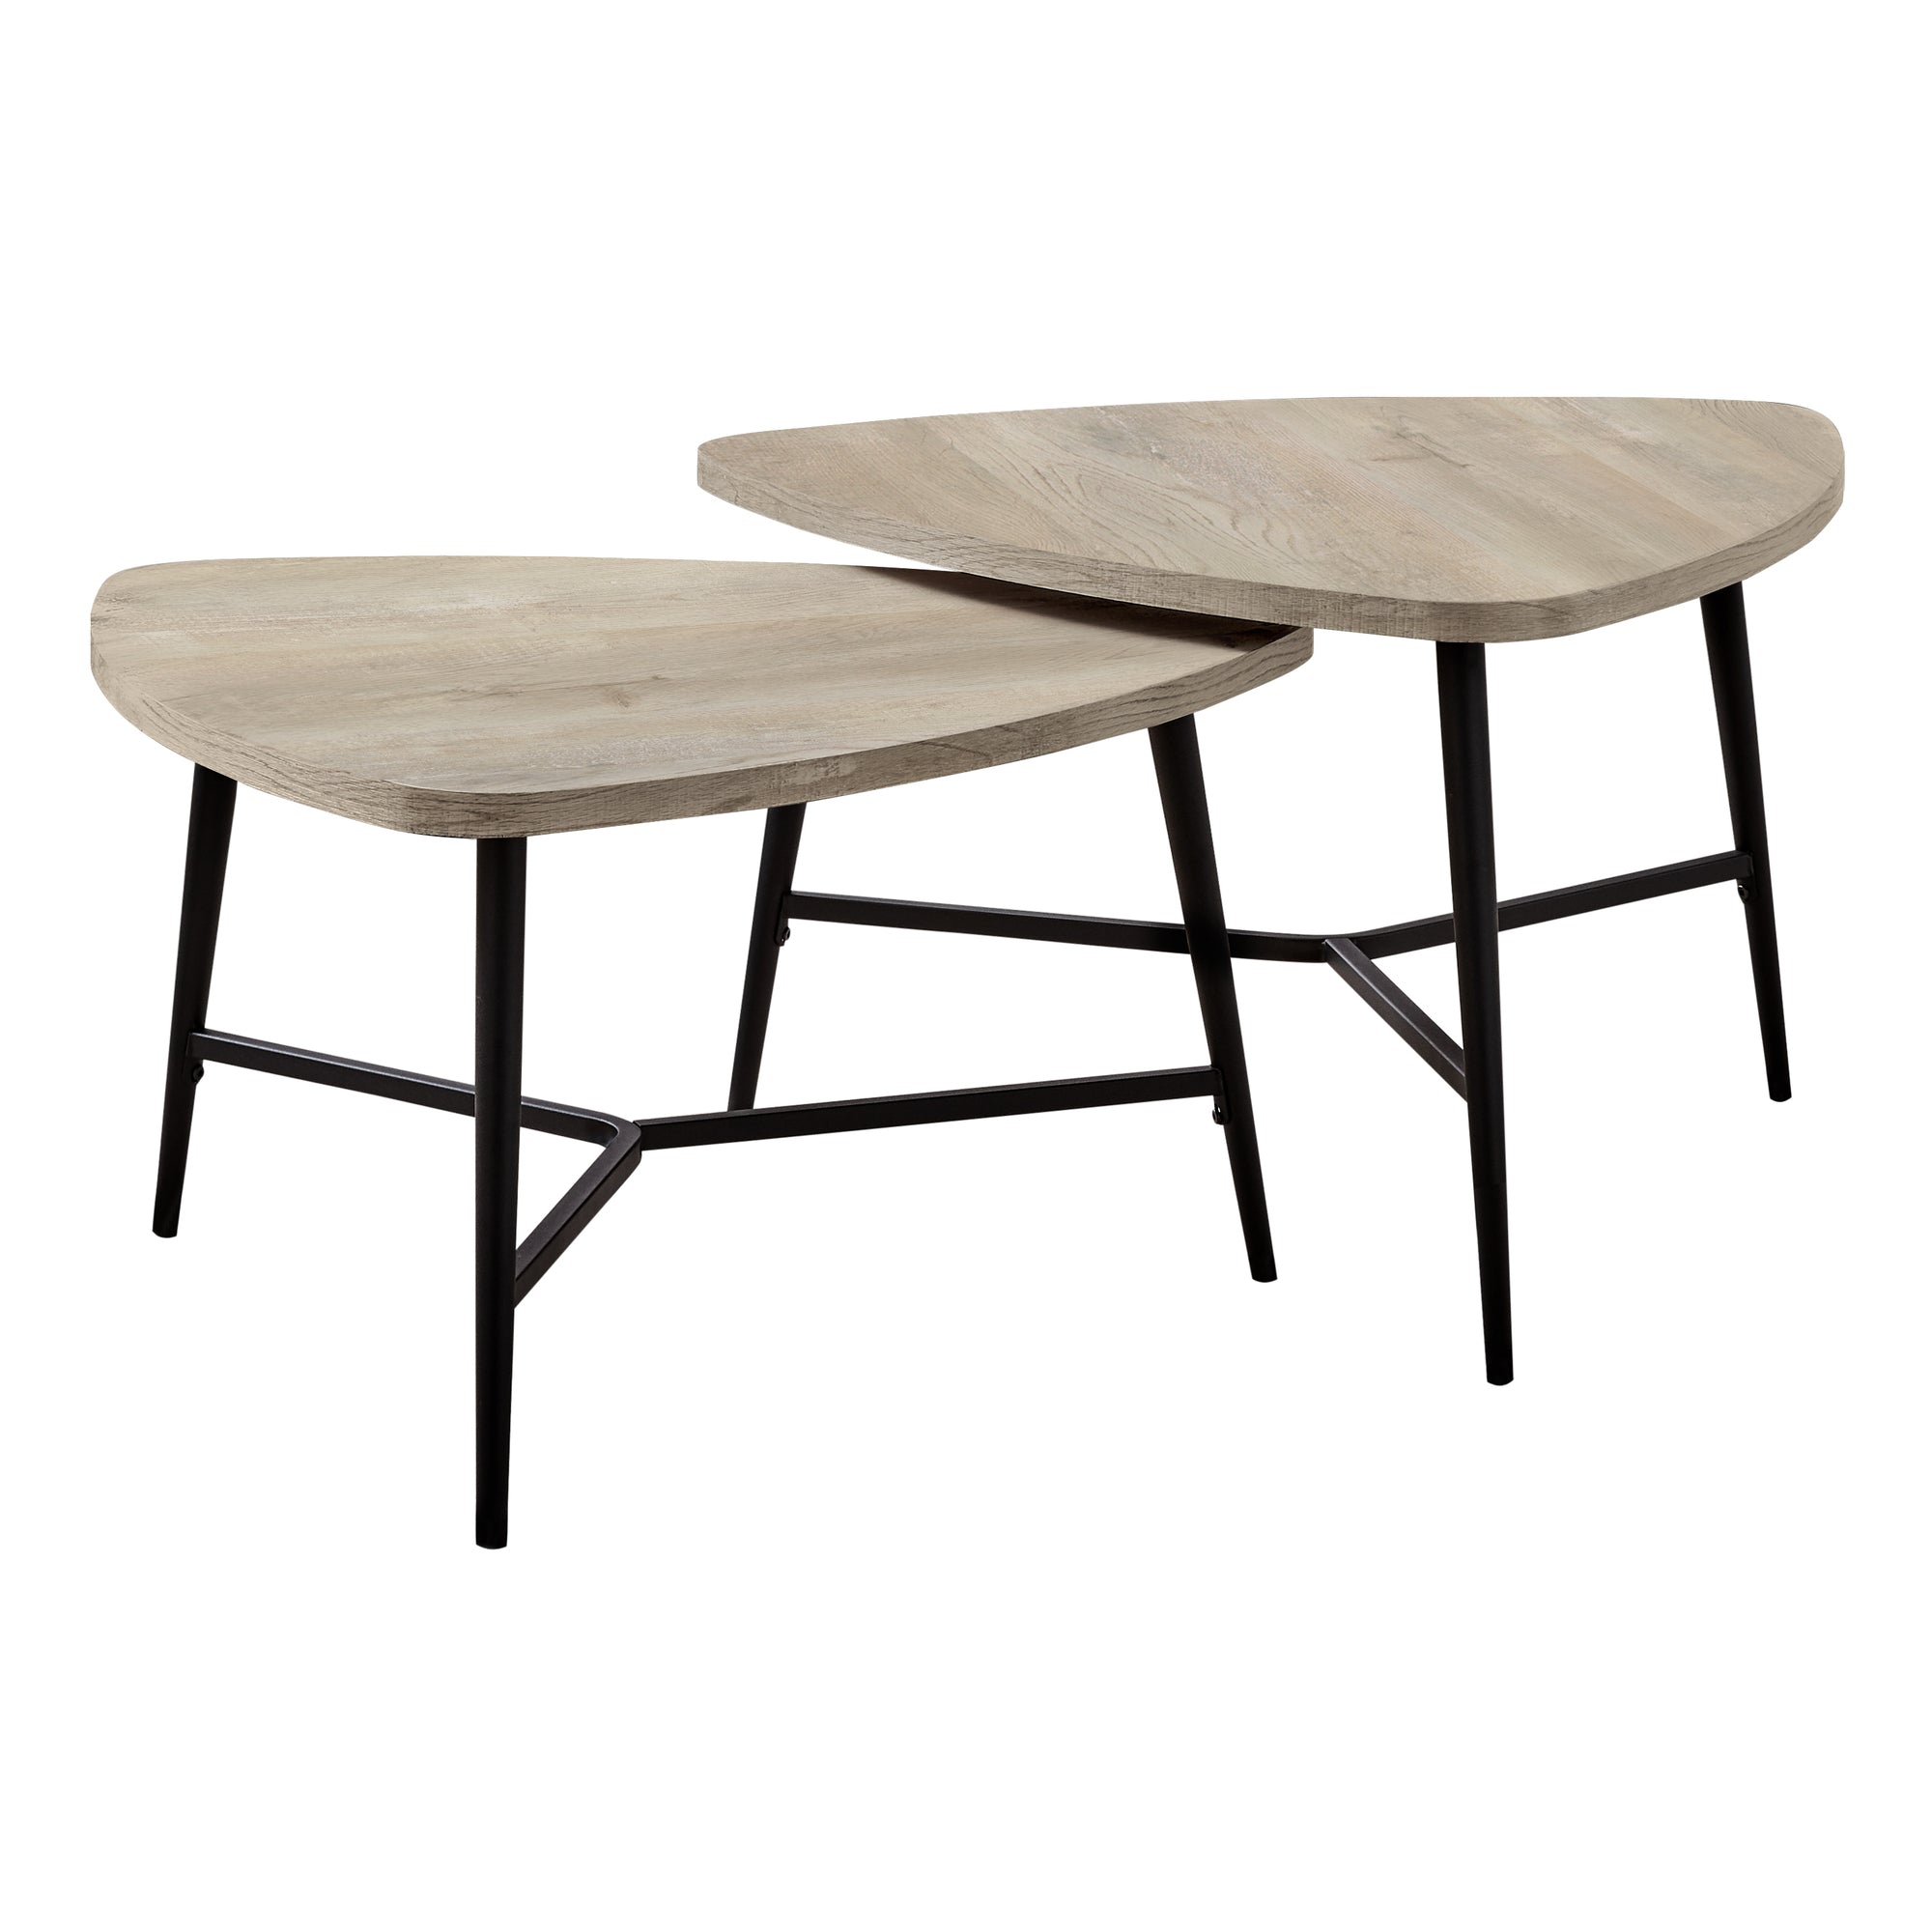 MN-727939P    Table Set, 2Pcs Set, Coffee, End, Side, Accent, Living Room, Laminate, Metal Legs, Taupe Reclaimed Wood Look, Black, Contemporary, Industrial, Modern